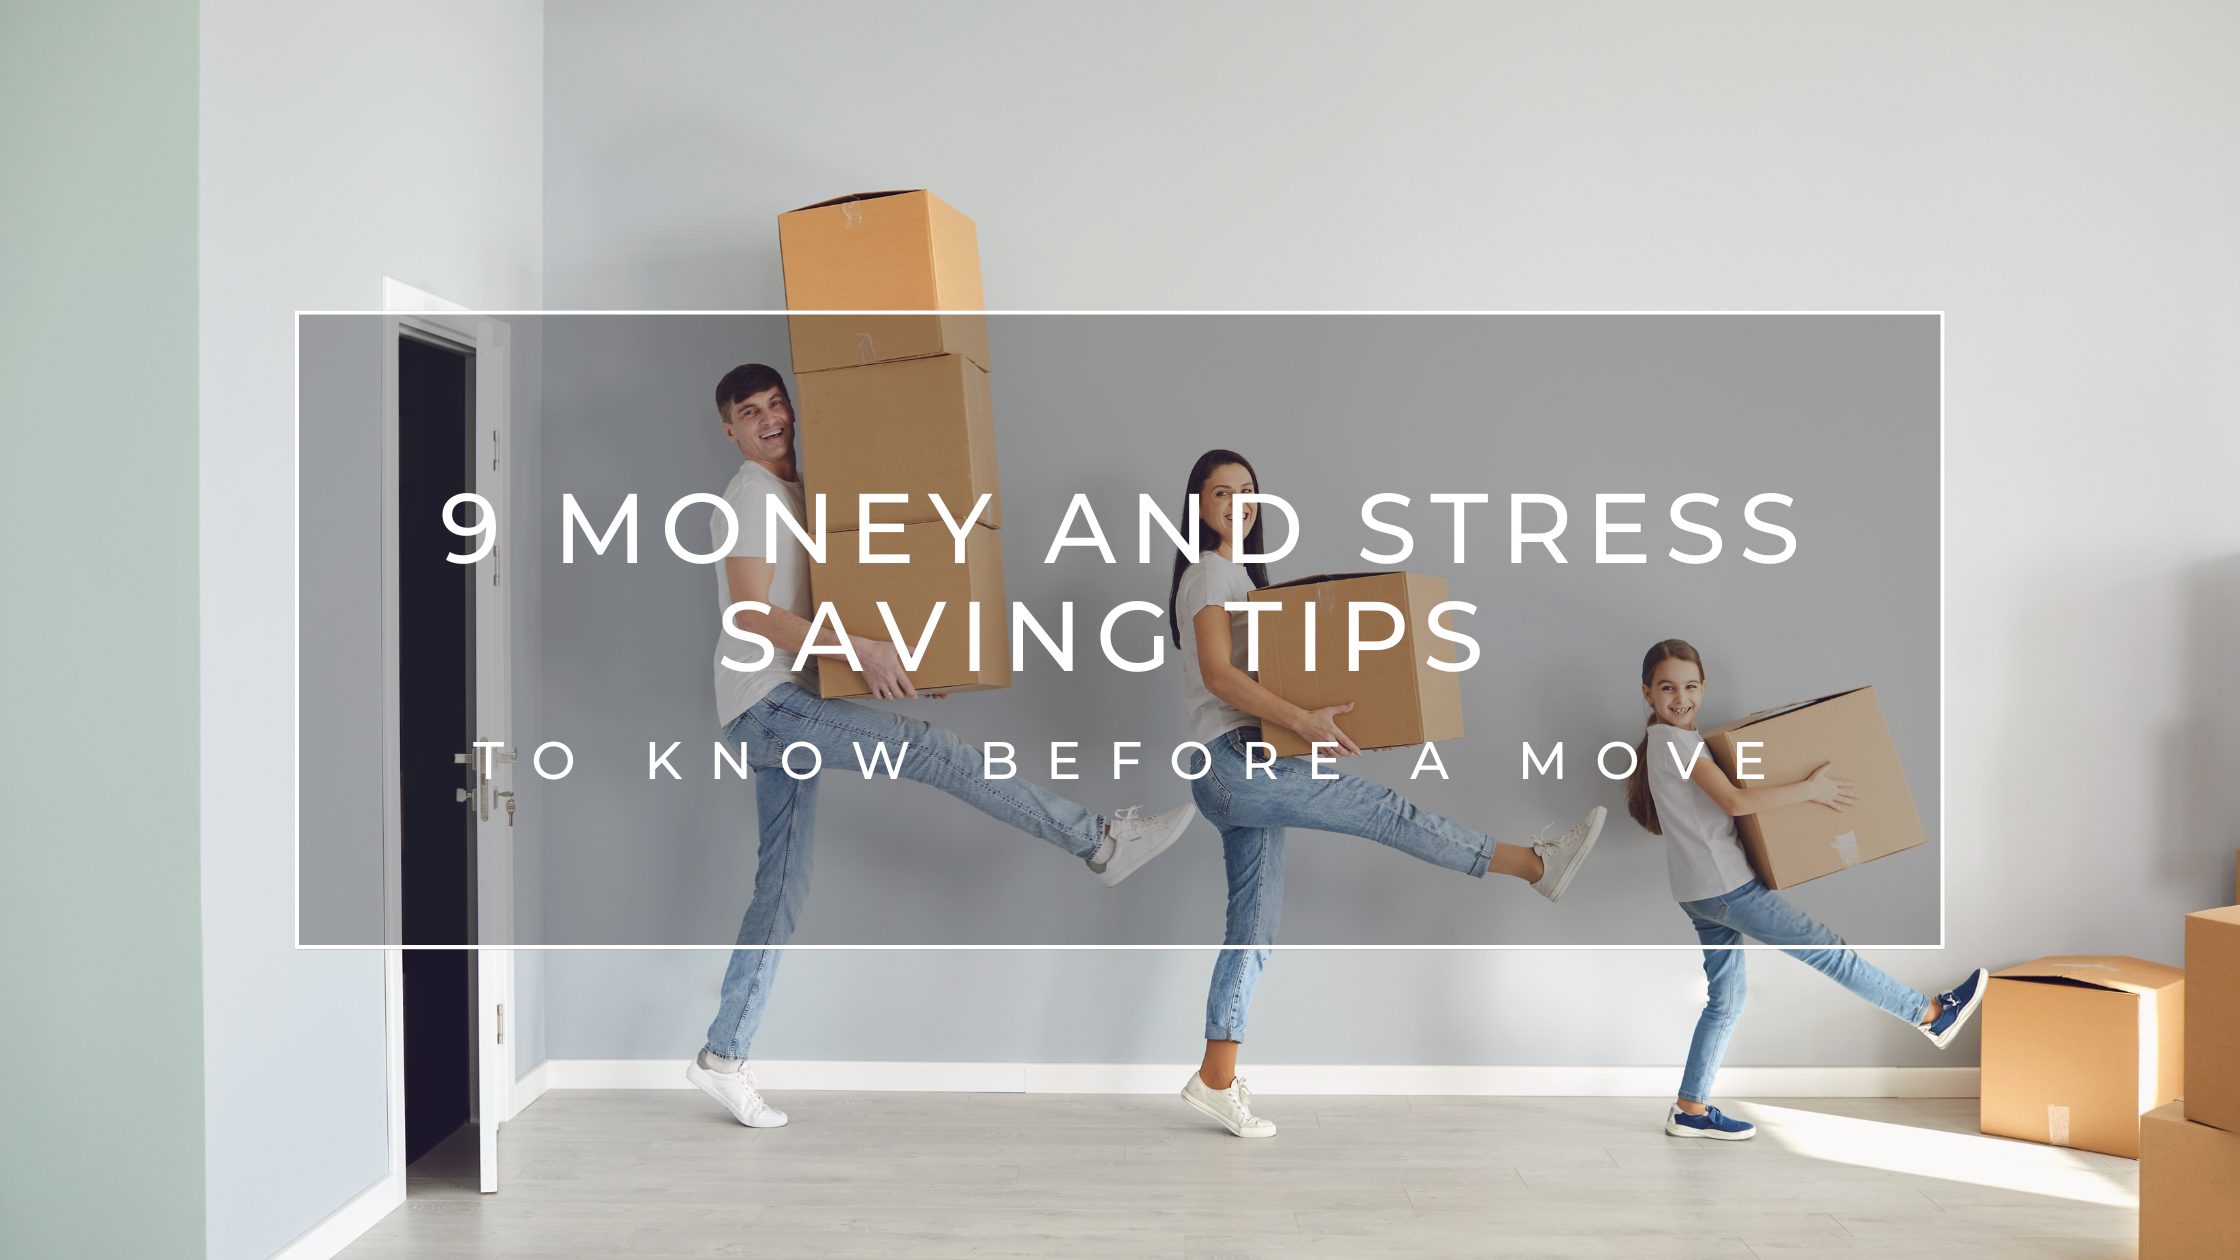 9 Money and Stress Saving Tips to Know Before a Move